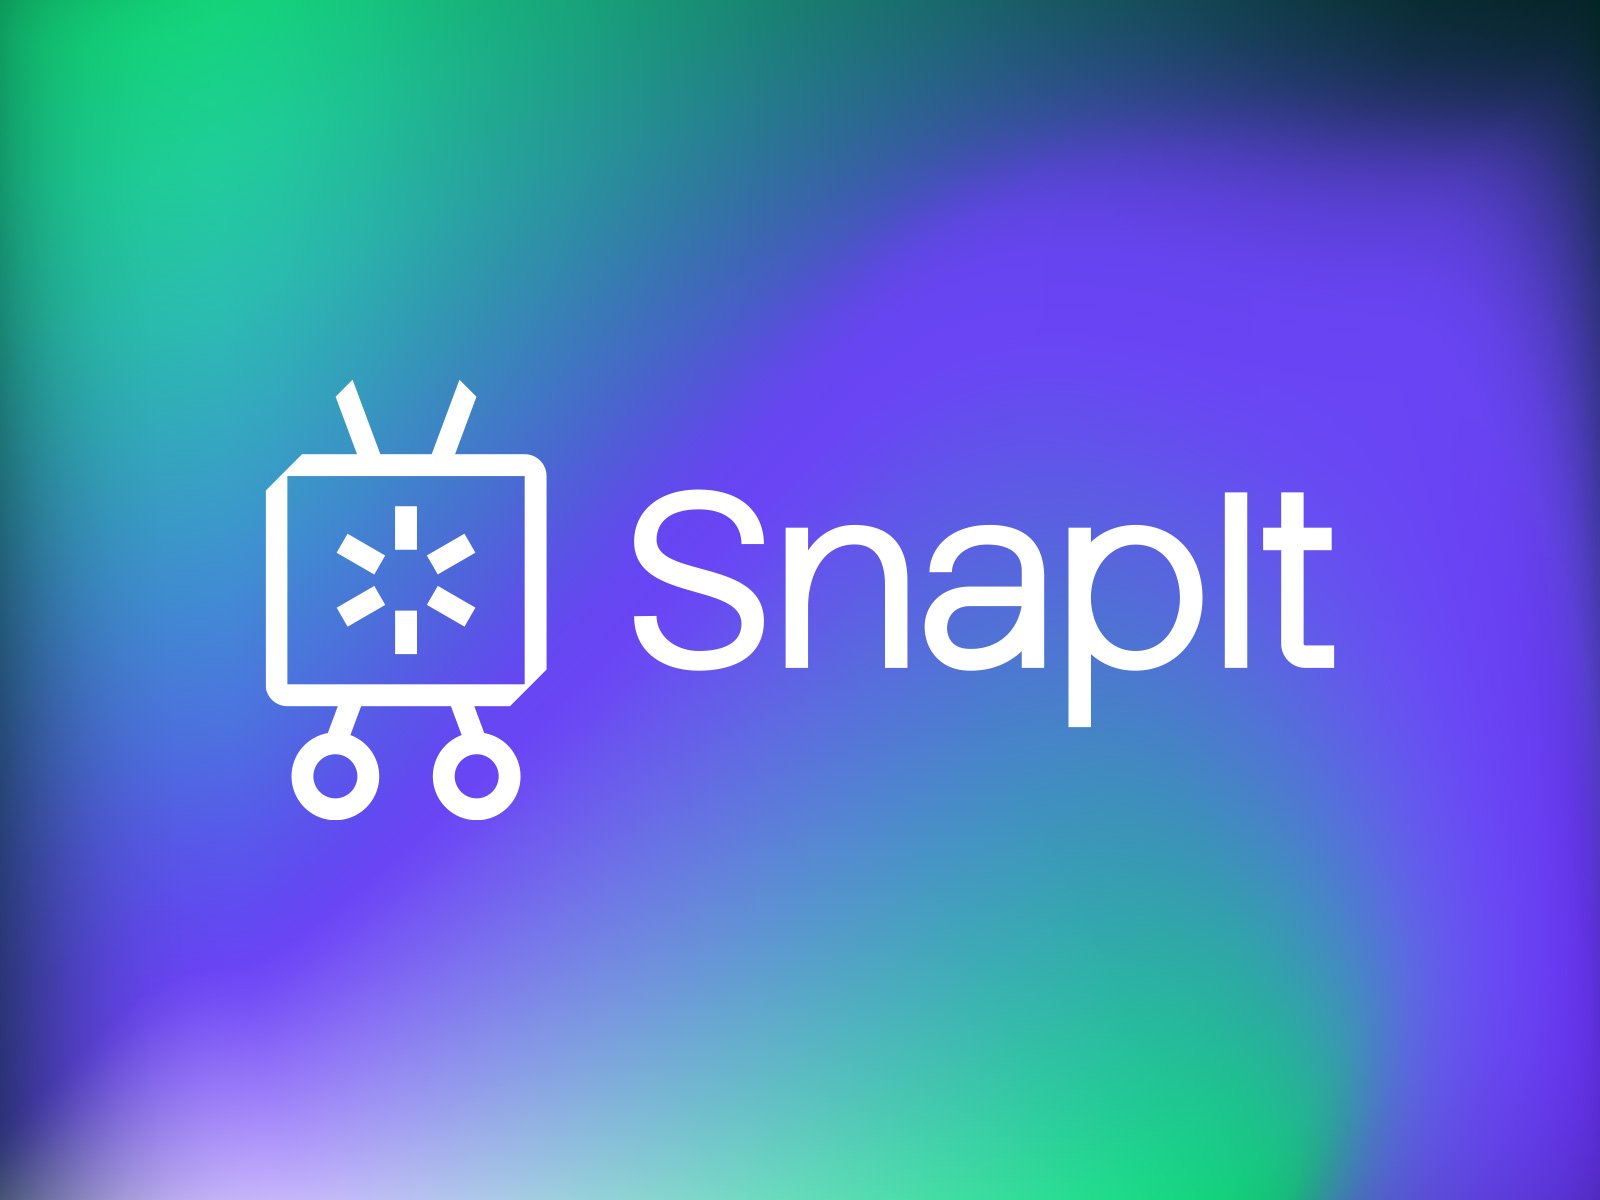 SnapIt logo on the brand gradient